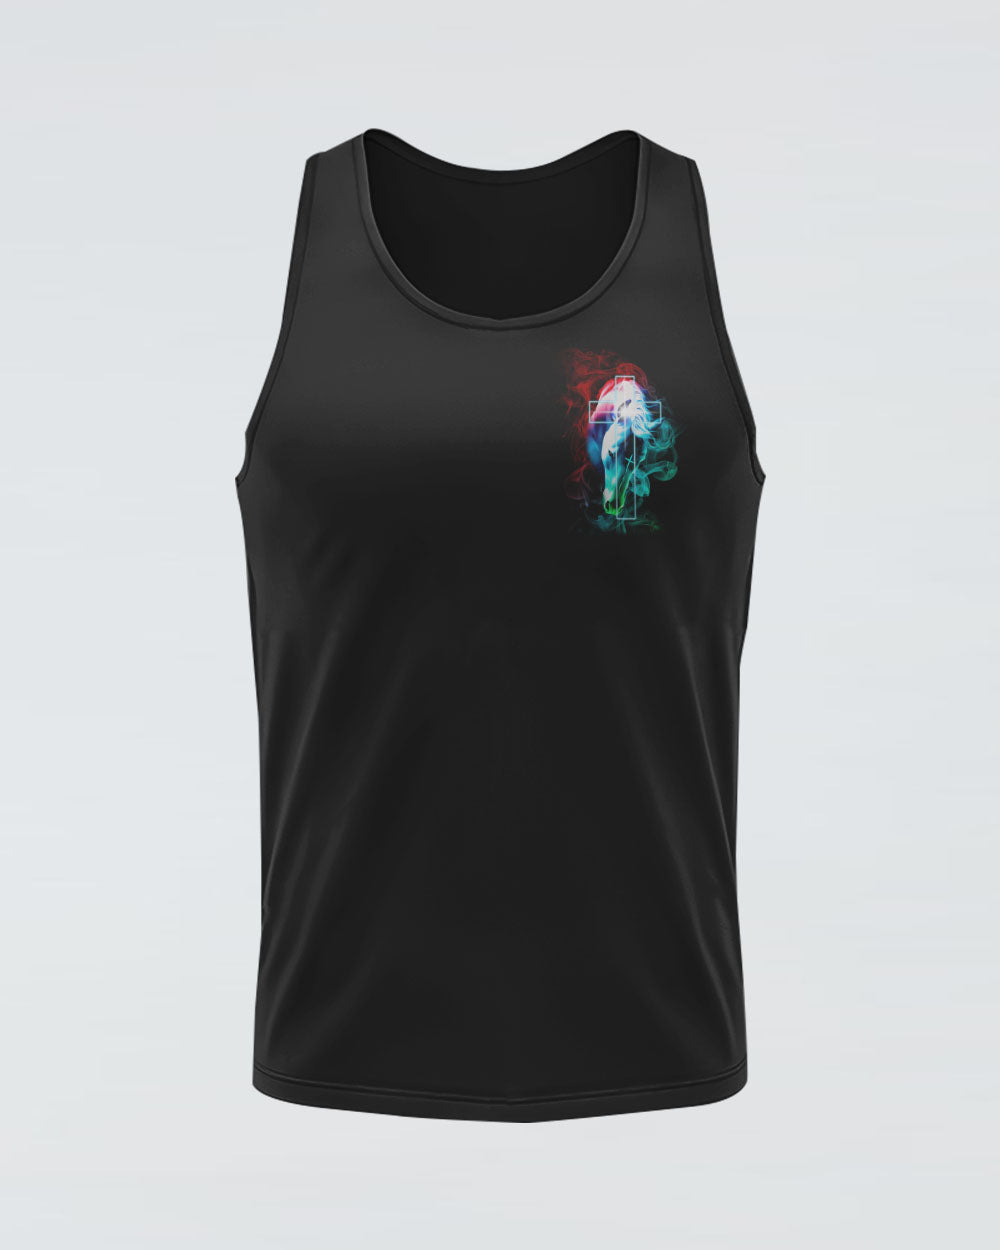 This Girl Runs On Jesus And Horse Colorful Smoke Women's Christian Tanks